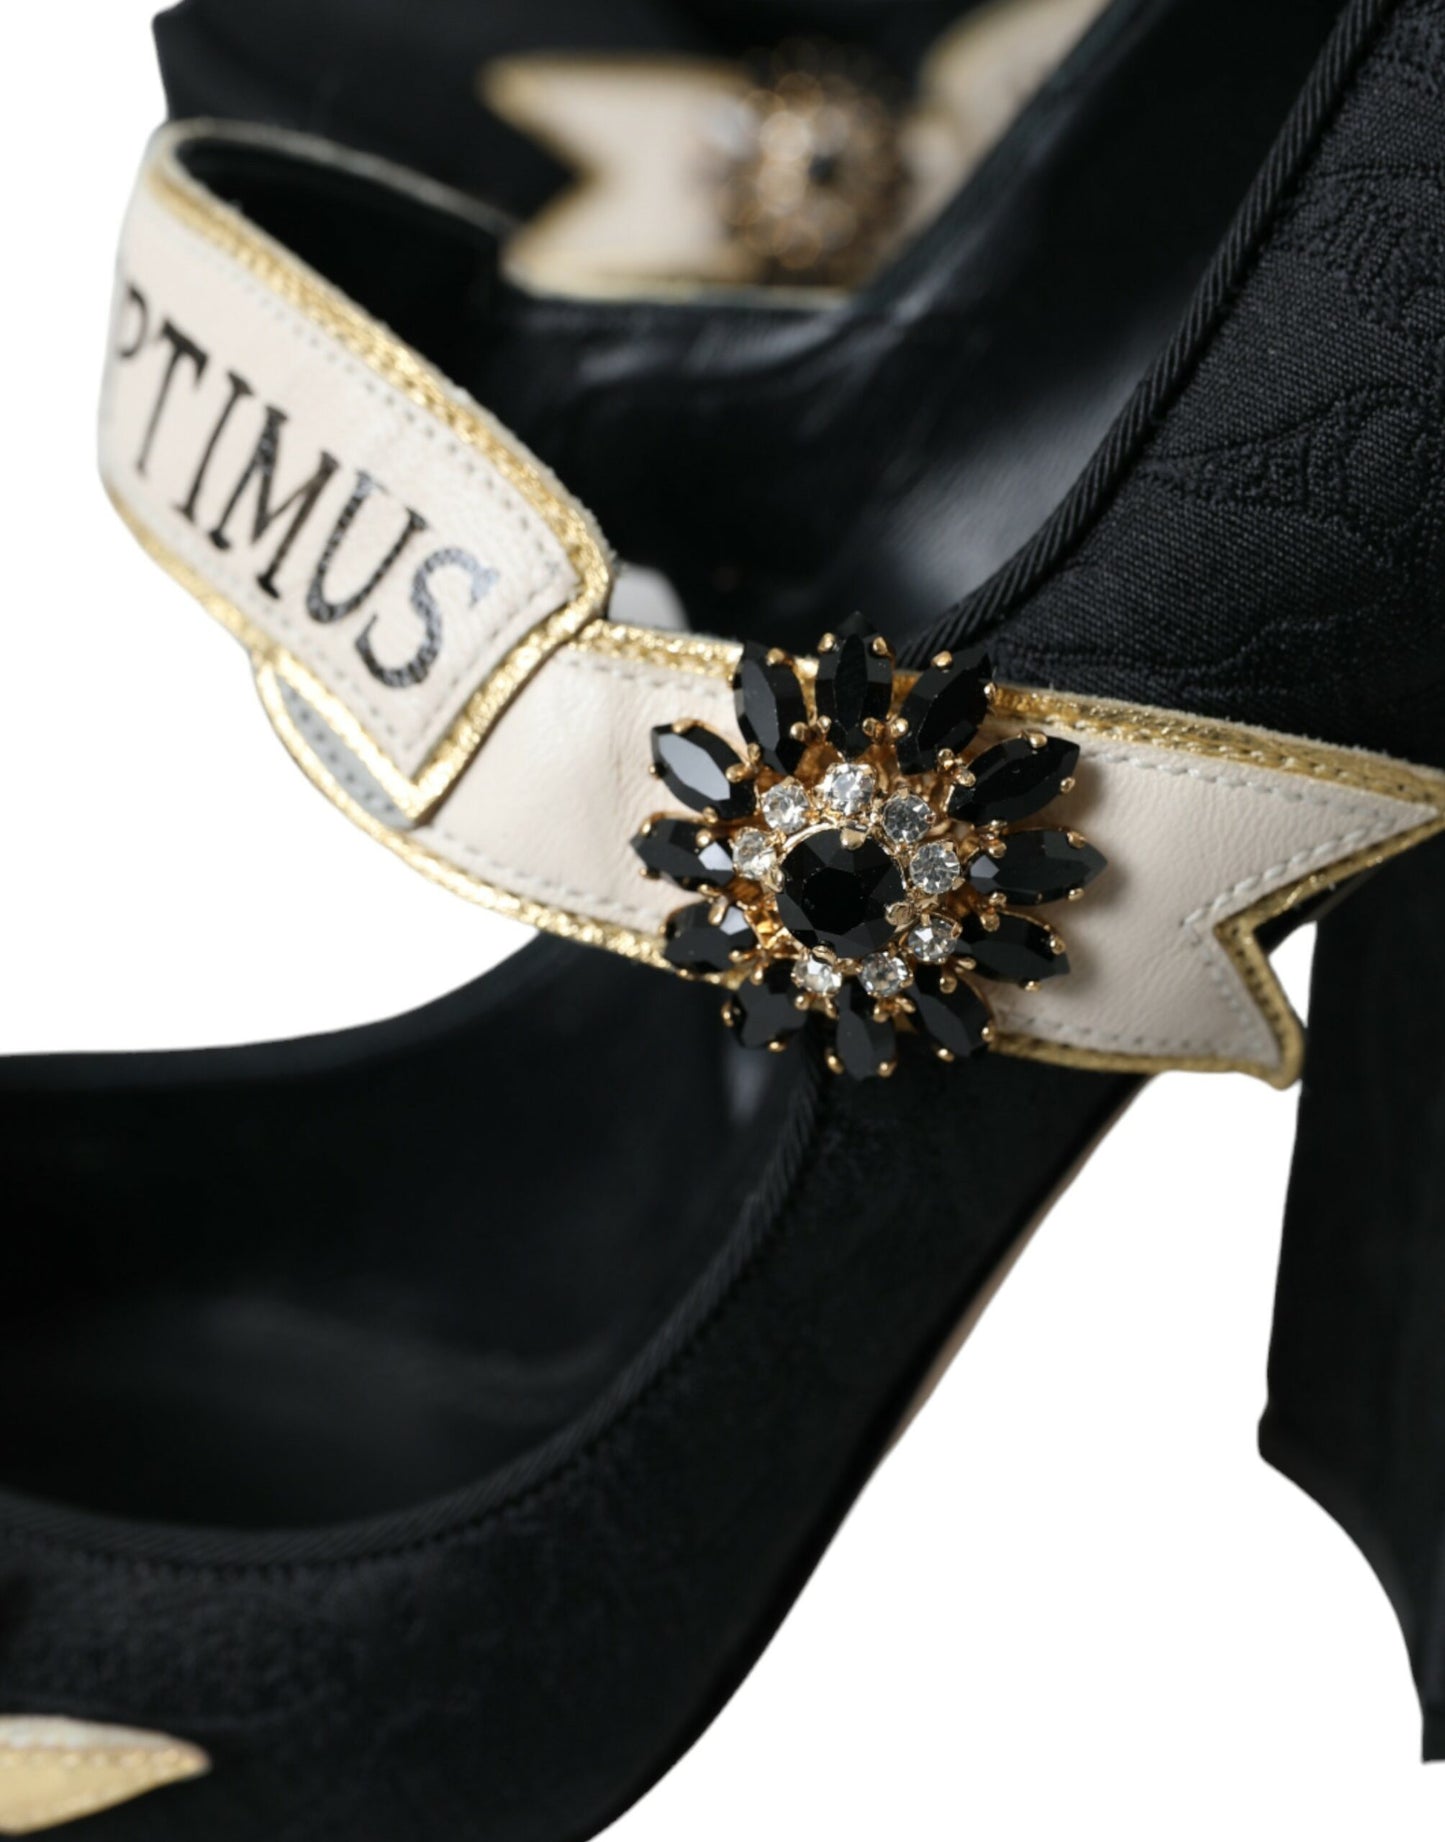 Dolce & Gabbana Black Brocade Mary Janes Crystal Pumps Shoes